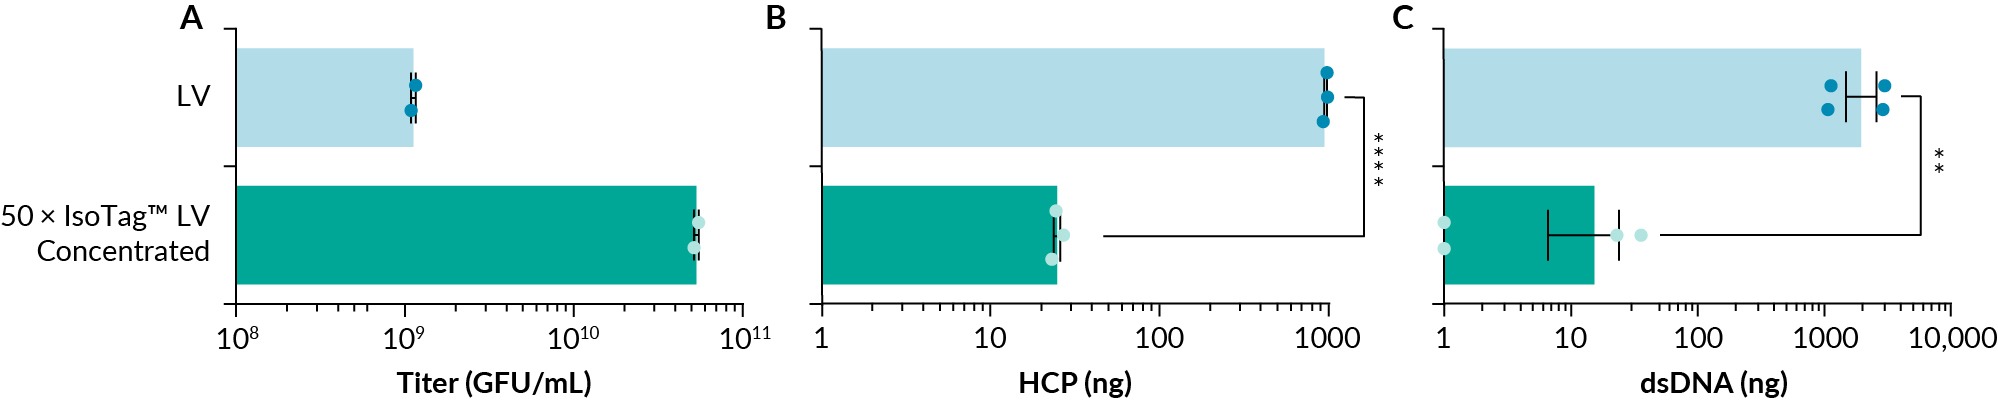 (A) IsoTag™ LV was able to concentrate LV 50-fold to 5.3e10 GFU/mL and concentration resulted in a (B) 1.5-log reduction in host cell protein (HCP) to 24.9 ng and a (C) 2-log reduction in dsDNA contaminants to 15.2 ng. Undetectable dsDNA samples were given a value of 1. n=2–6, error bars represent the standard error of the mean. Statistical significance calculated using a (A & B) one-way ANOVA or (C) student t-test. ns=not significantly different. **p<0.01; ****p<0.0001.